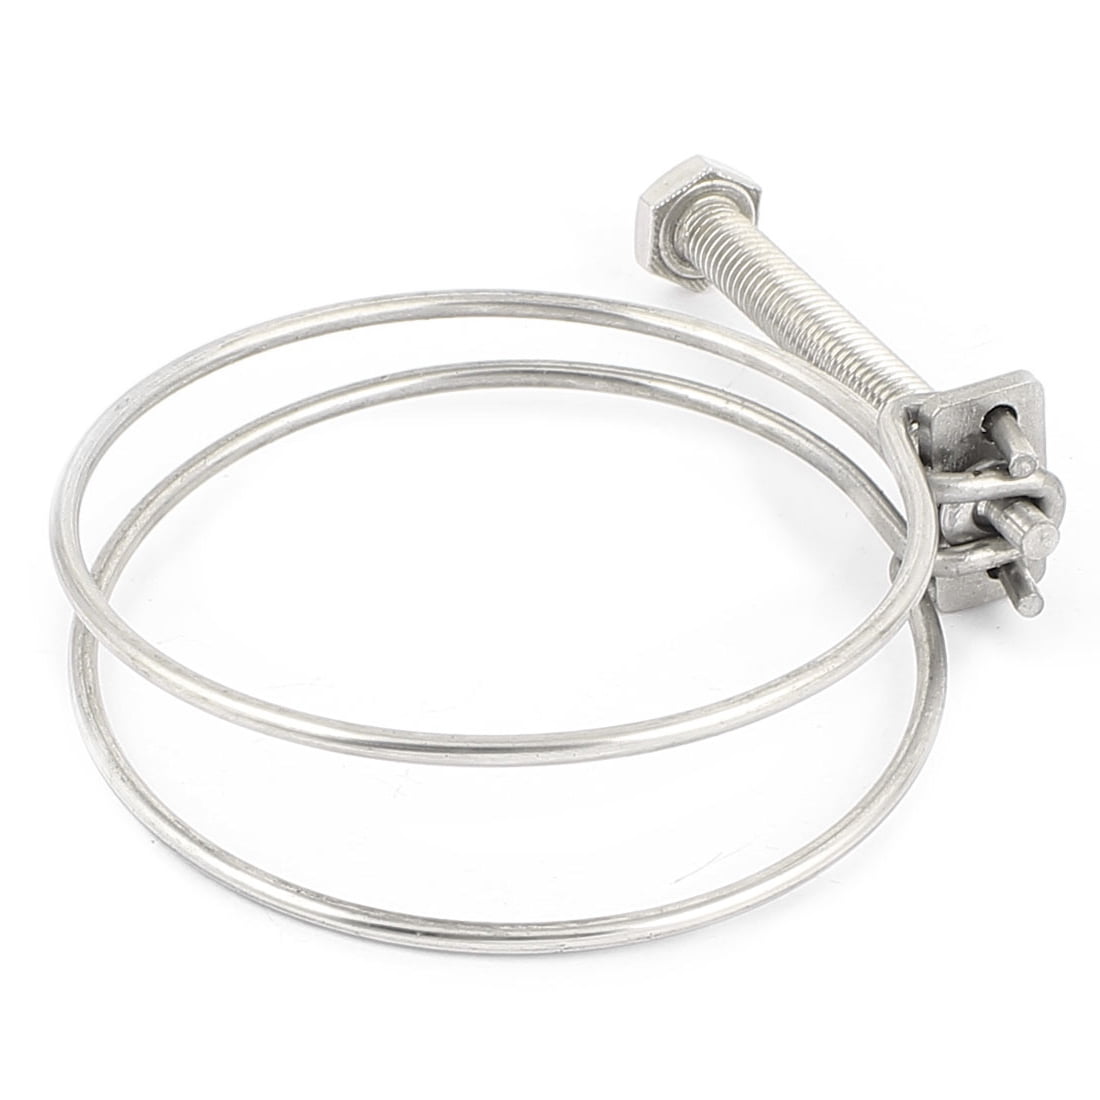 Pond Hose Clips 2" x 10-2 Wire White 53mm-58mm Koi Filter Jubilee 